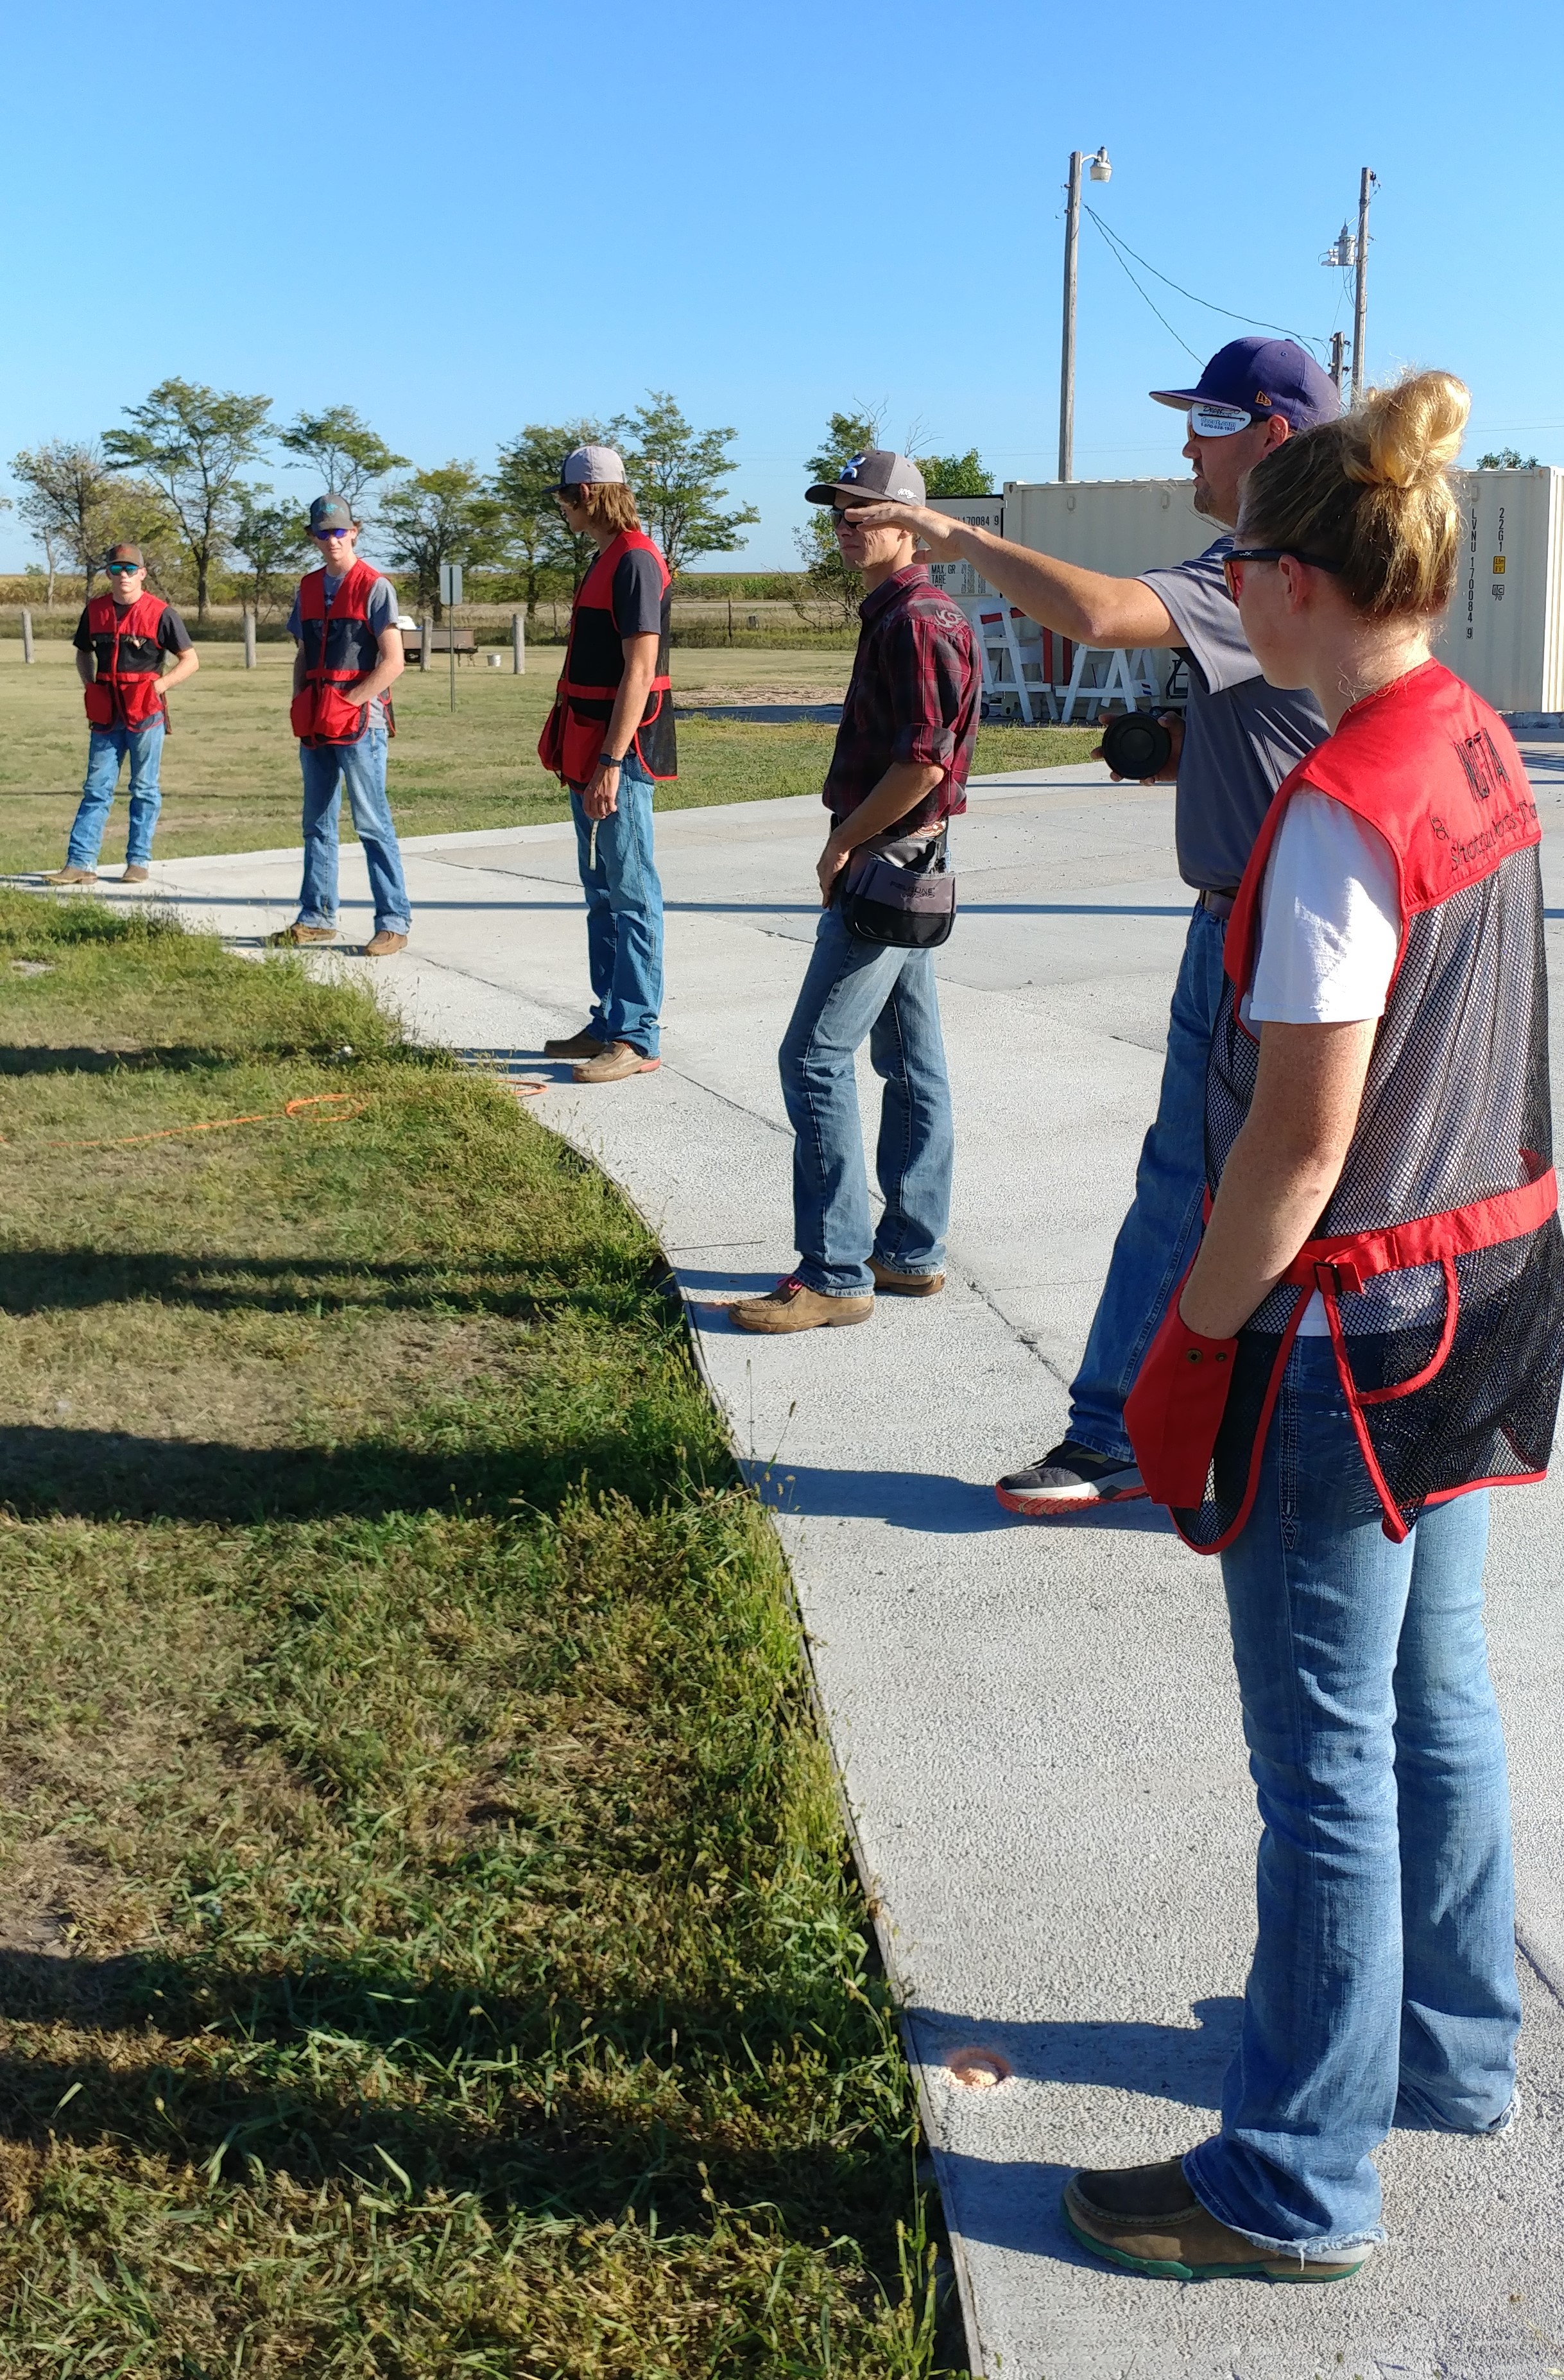 The Aggie Shooters receive trap shooting tips from Britt Dalton, who was helping the trap squad at a recent workout. (Mary Crawford/NCTA News)